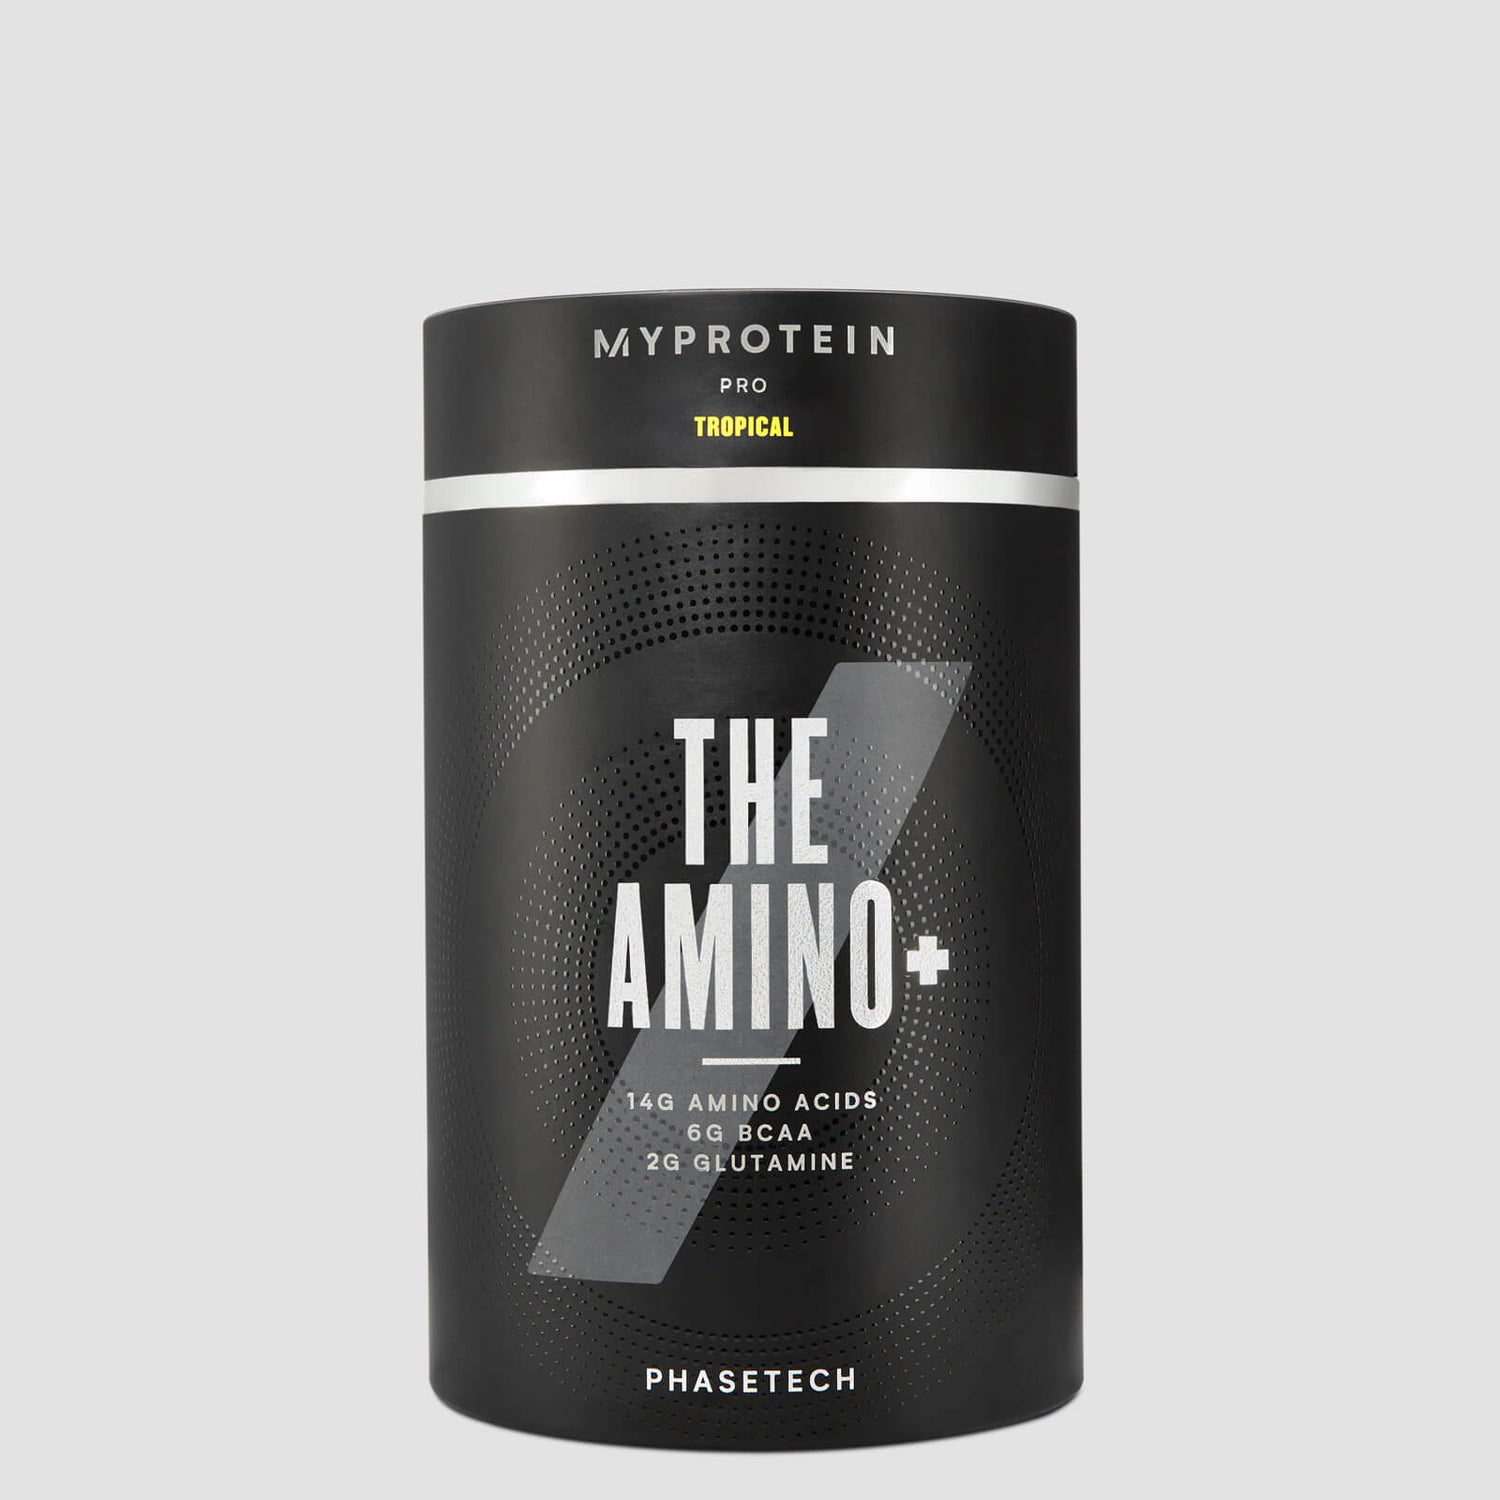 Myprotein THE Amino+ with PhaseTech - 20servings - Tropsko